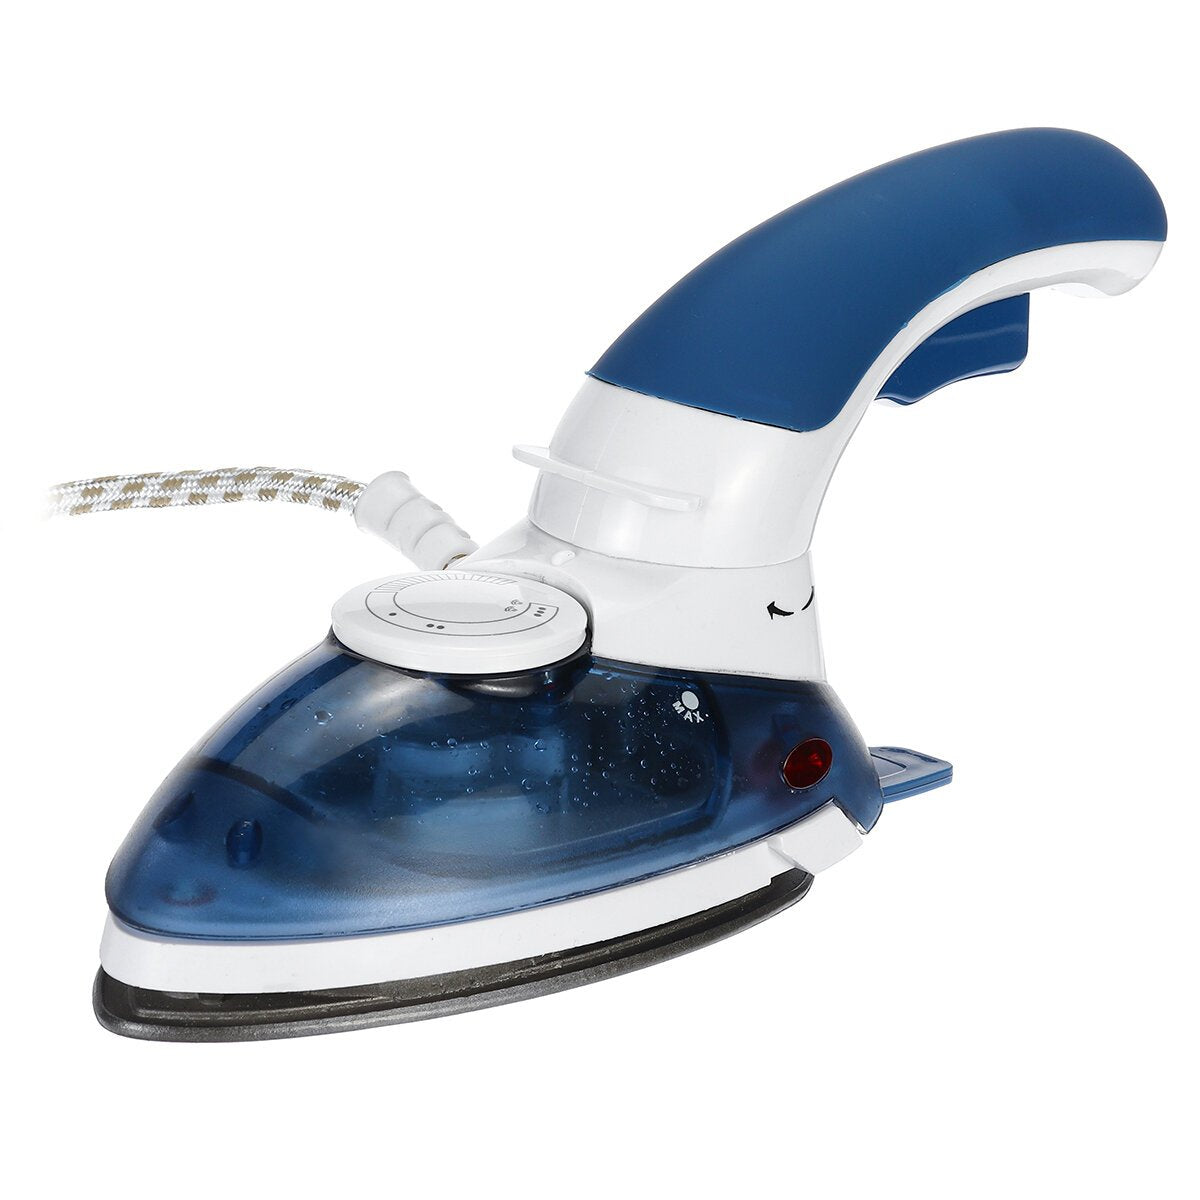 1000W Handheld Portable Garment Steamer 3 Gear Powerful Clothes Steam Iron Fast Heat-up Fabric Wrinkle Removal for Travel Home Dormitory